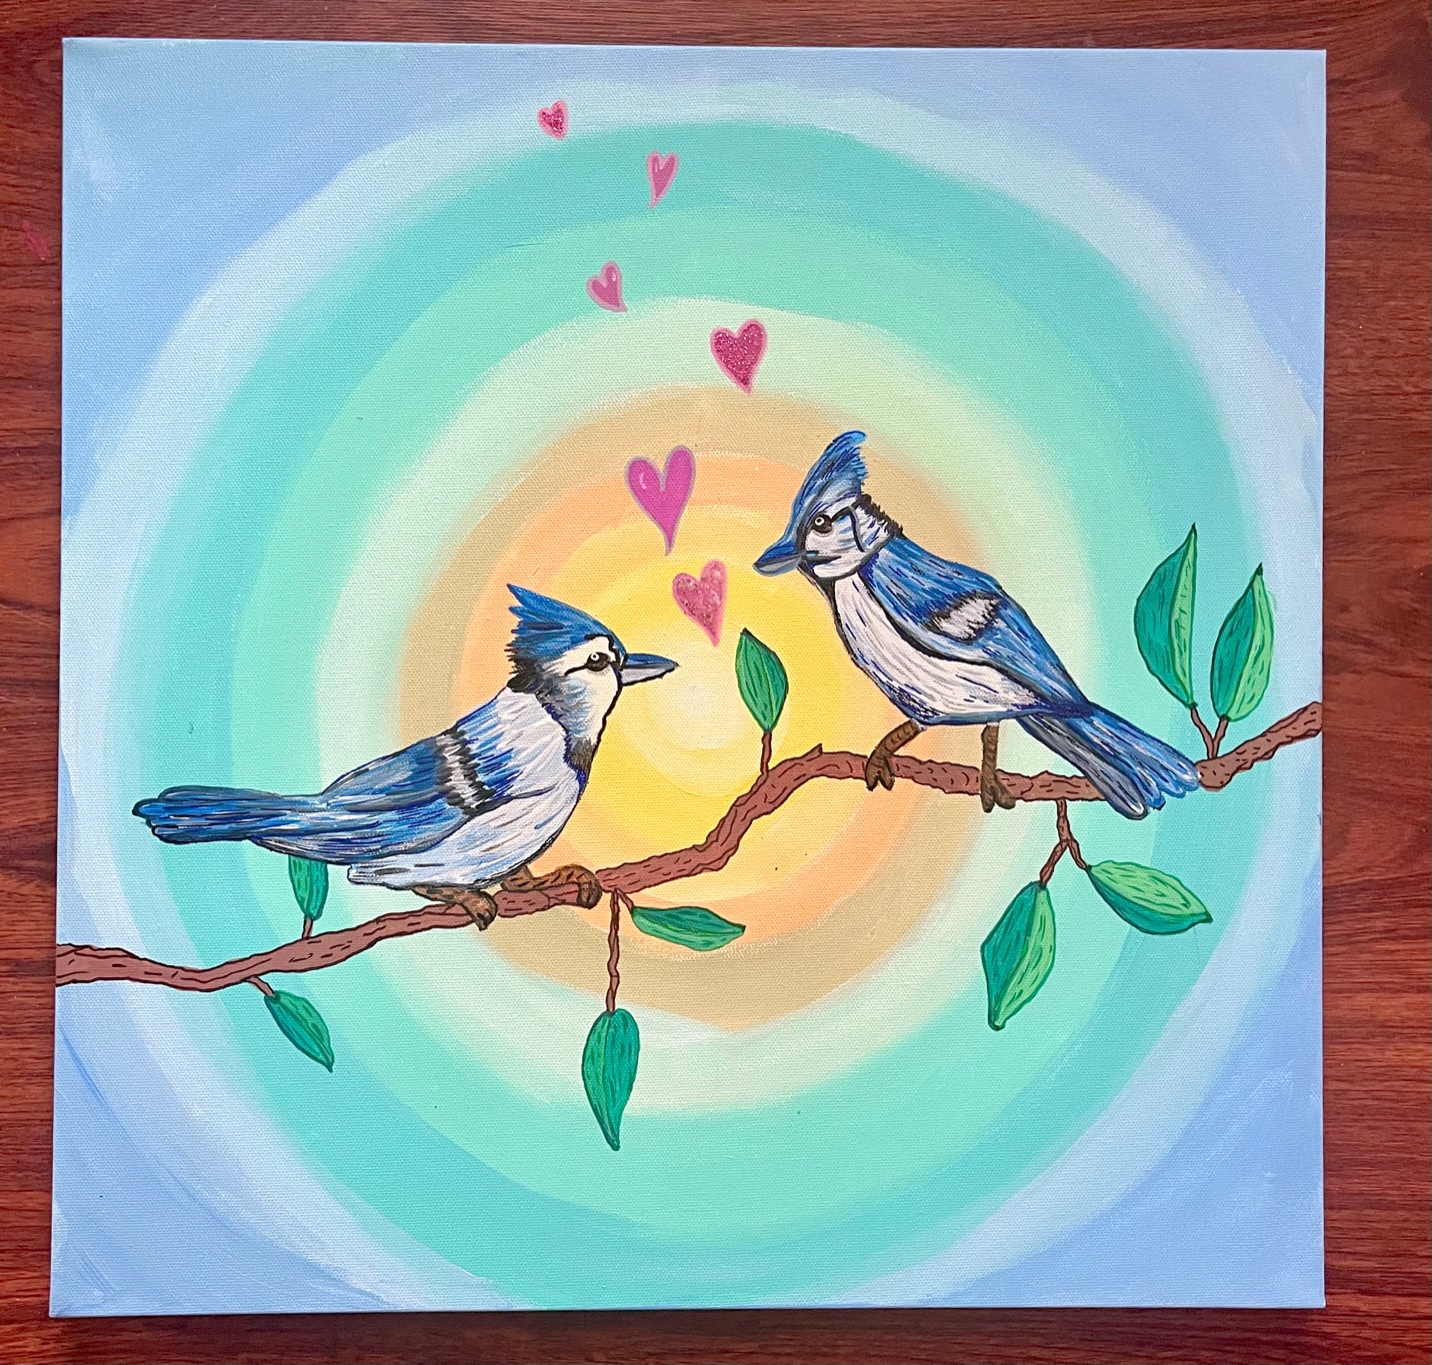 Artist Caryn Frishman's piece, "Two Sisters," which shows two blue jays sitting on a branch together.